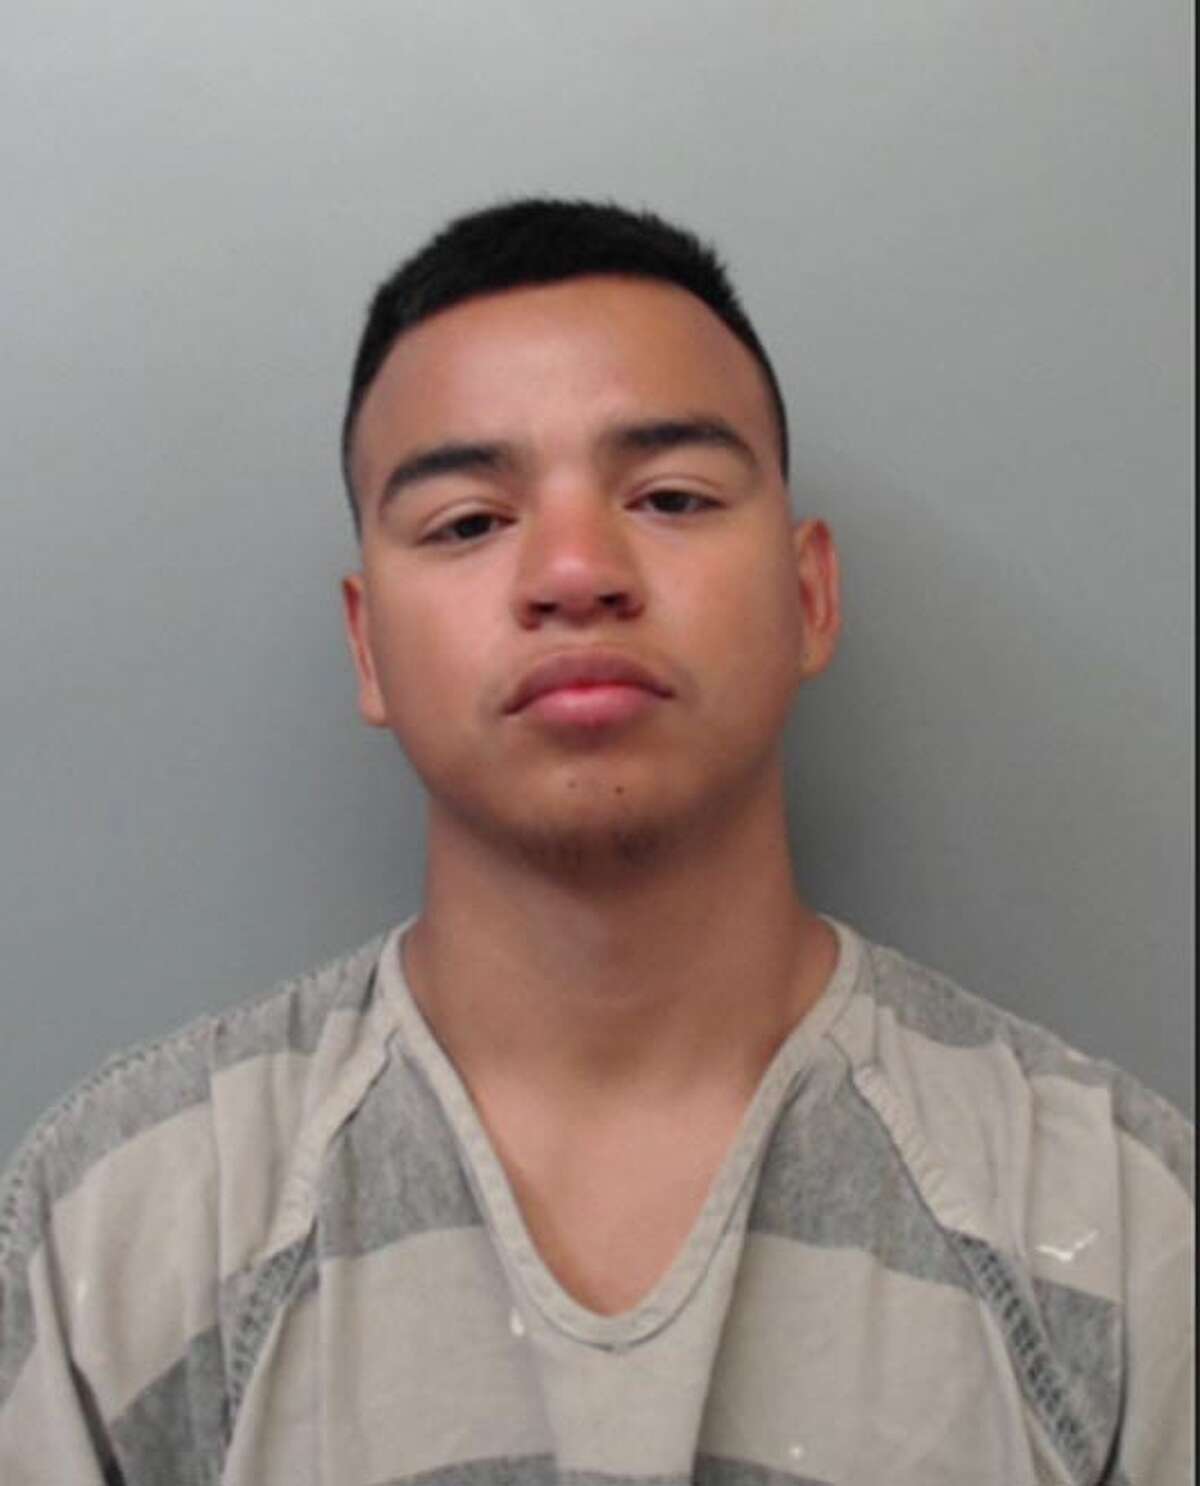 Javier Antonio Cardenas, 17, was charged with theft of materials.